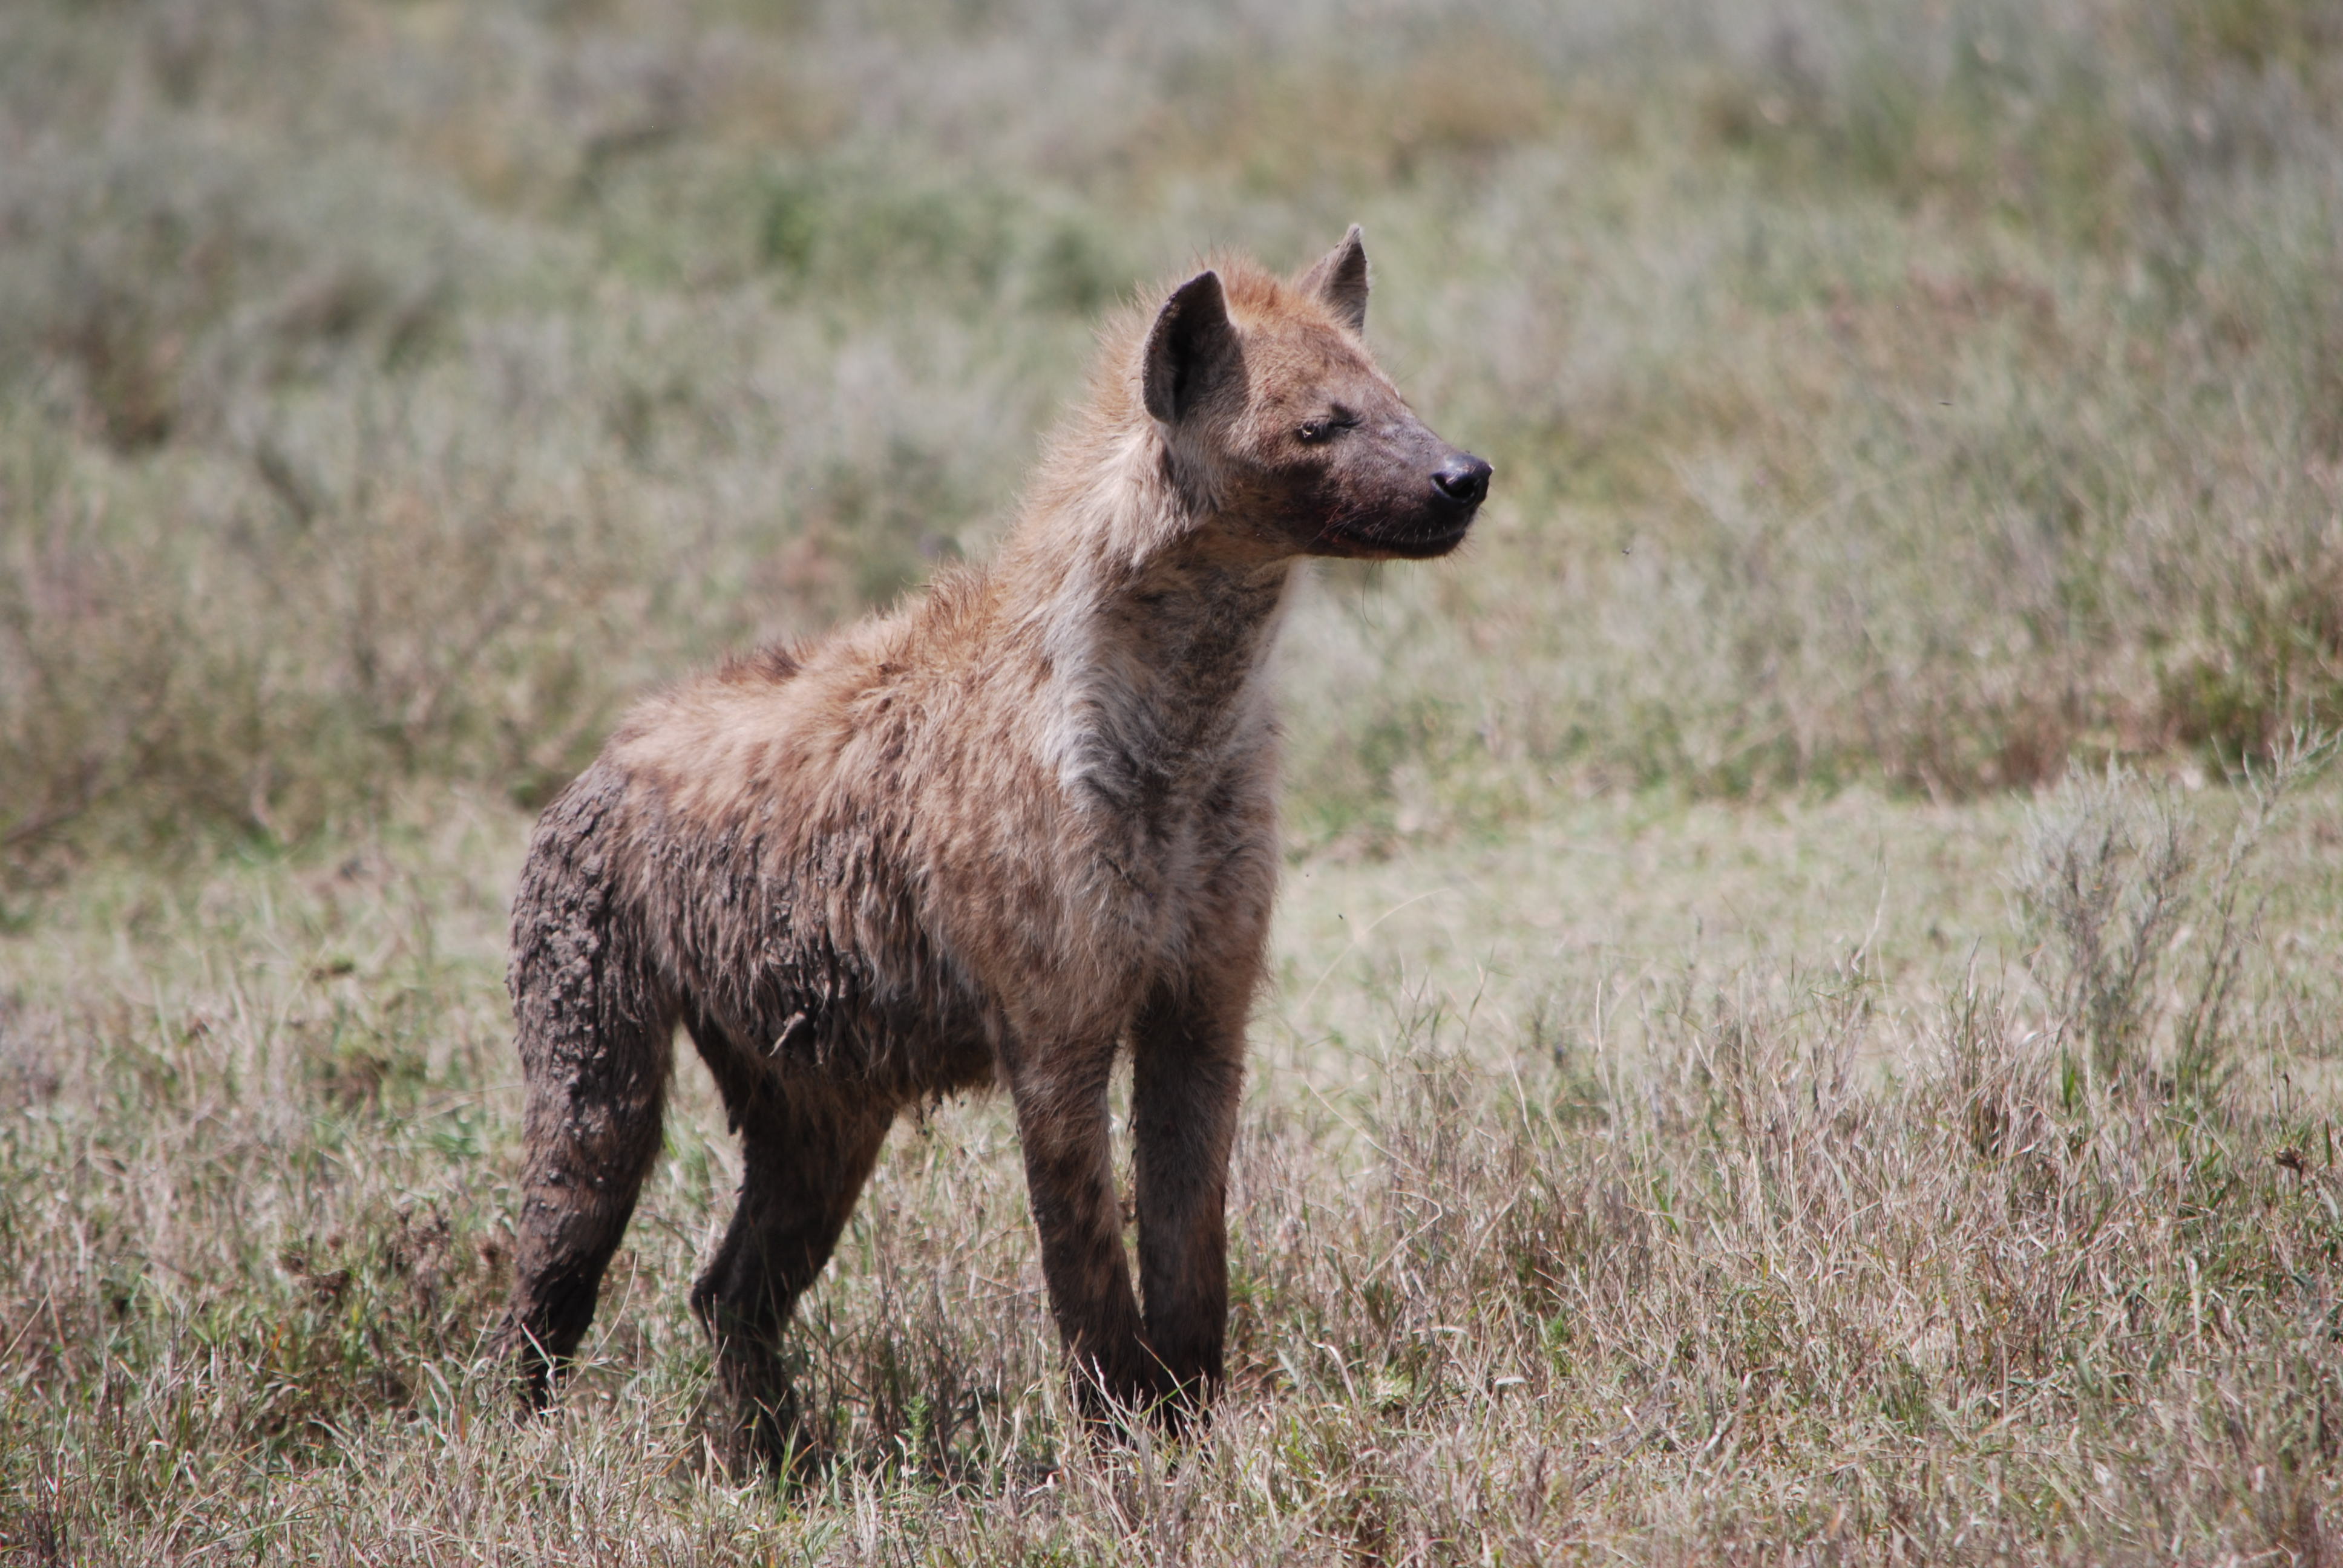 Hyenas, jackals and vultures: the scavengers of the Savannah [video]